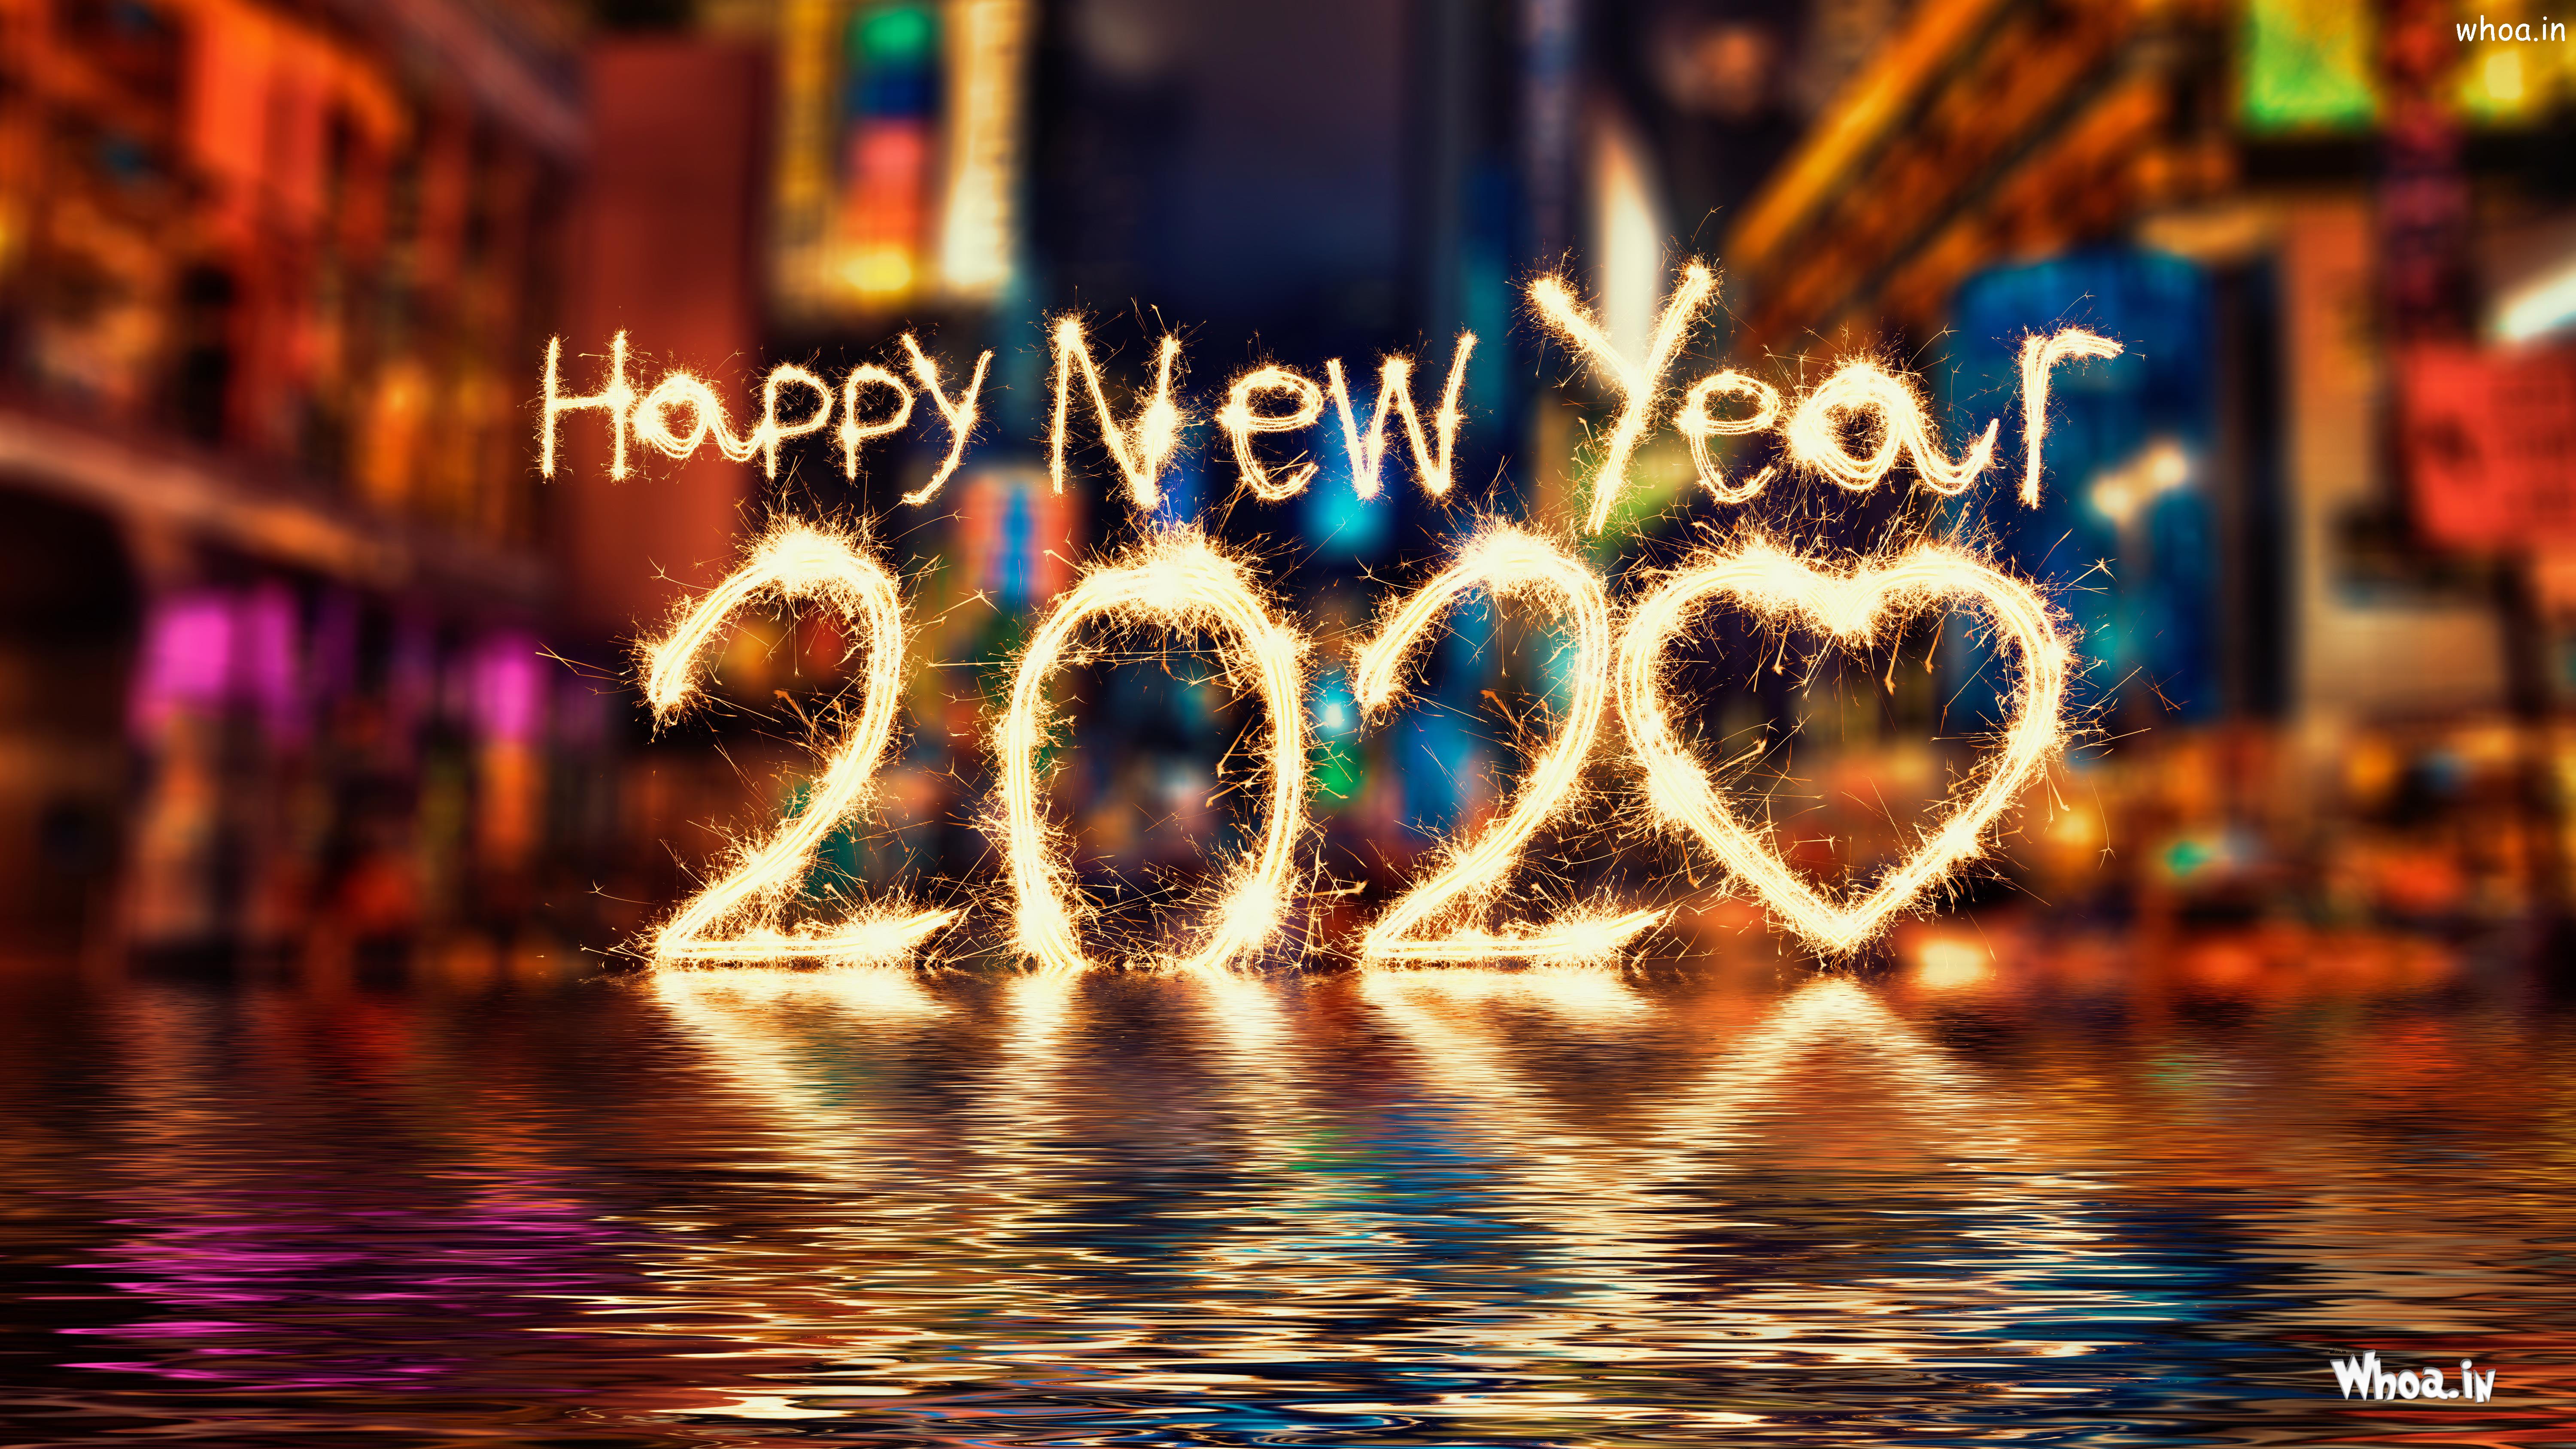 Happy New Year 2020 Welcome 2020 New Year Celebration Ultra Hd 4K Images #2  Happy-New-Year Wallpaper